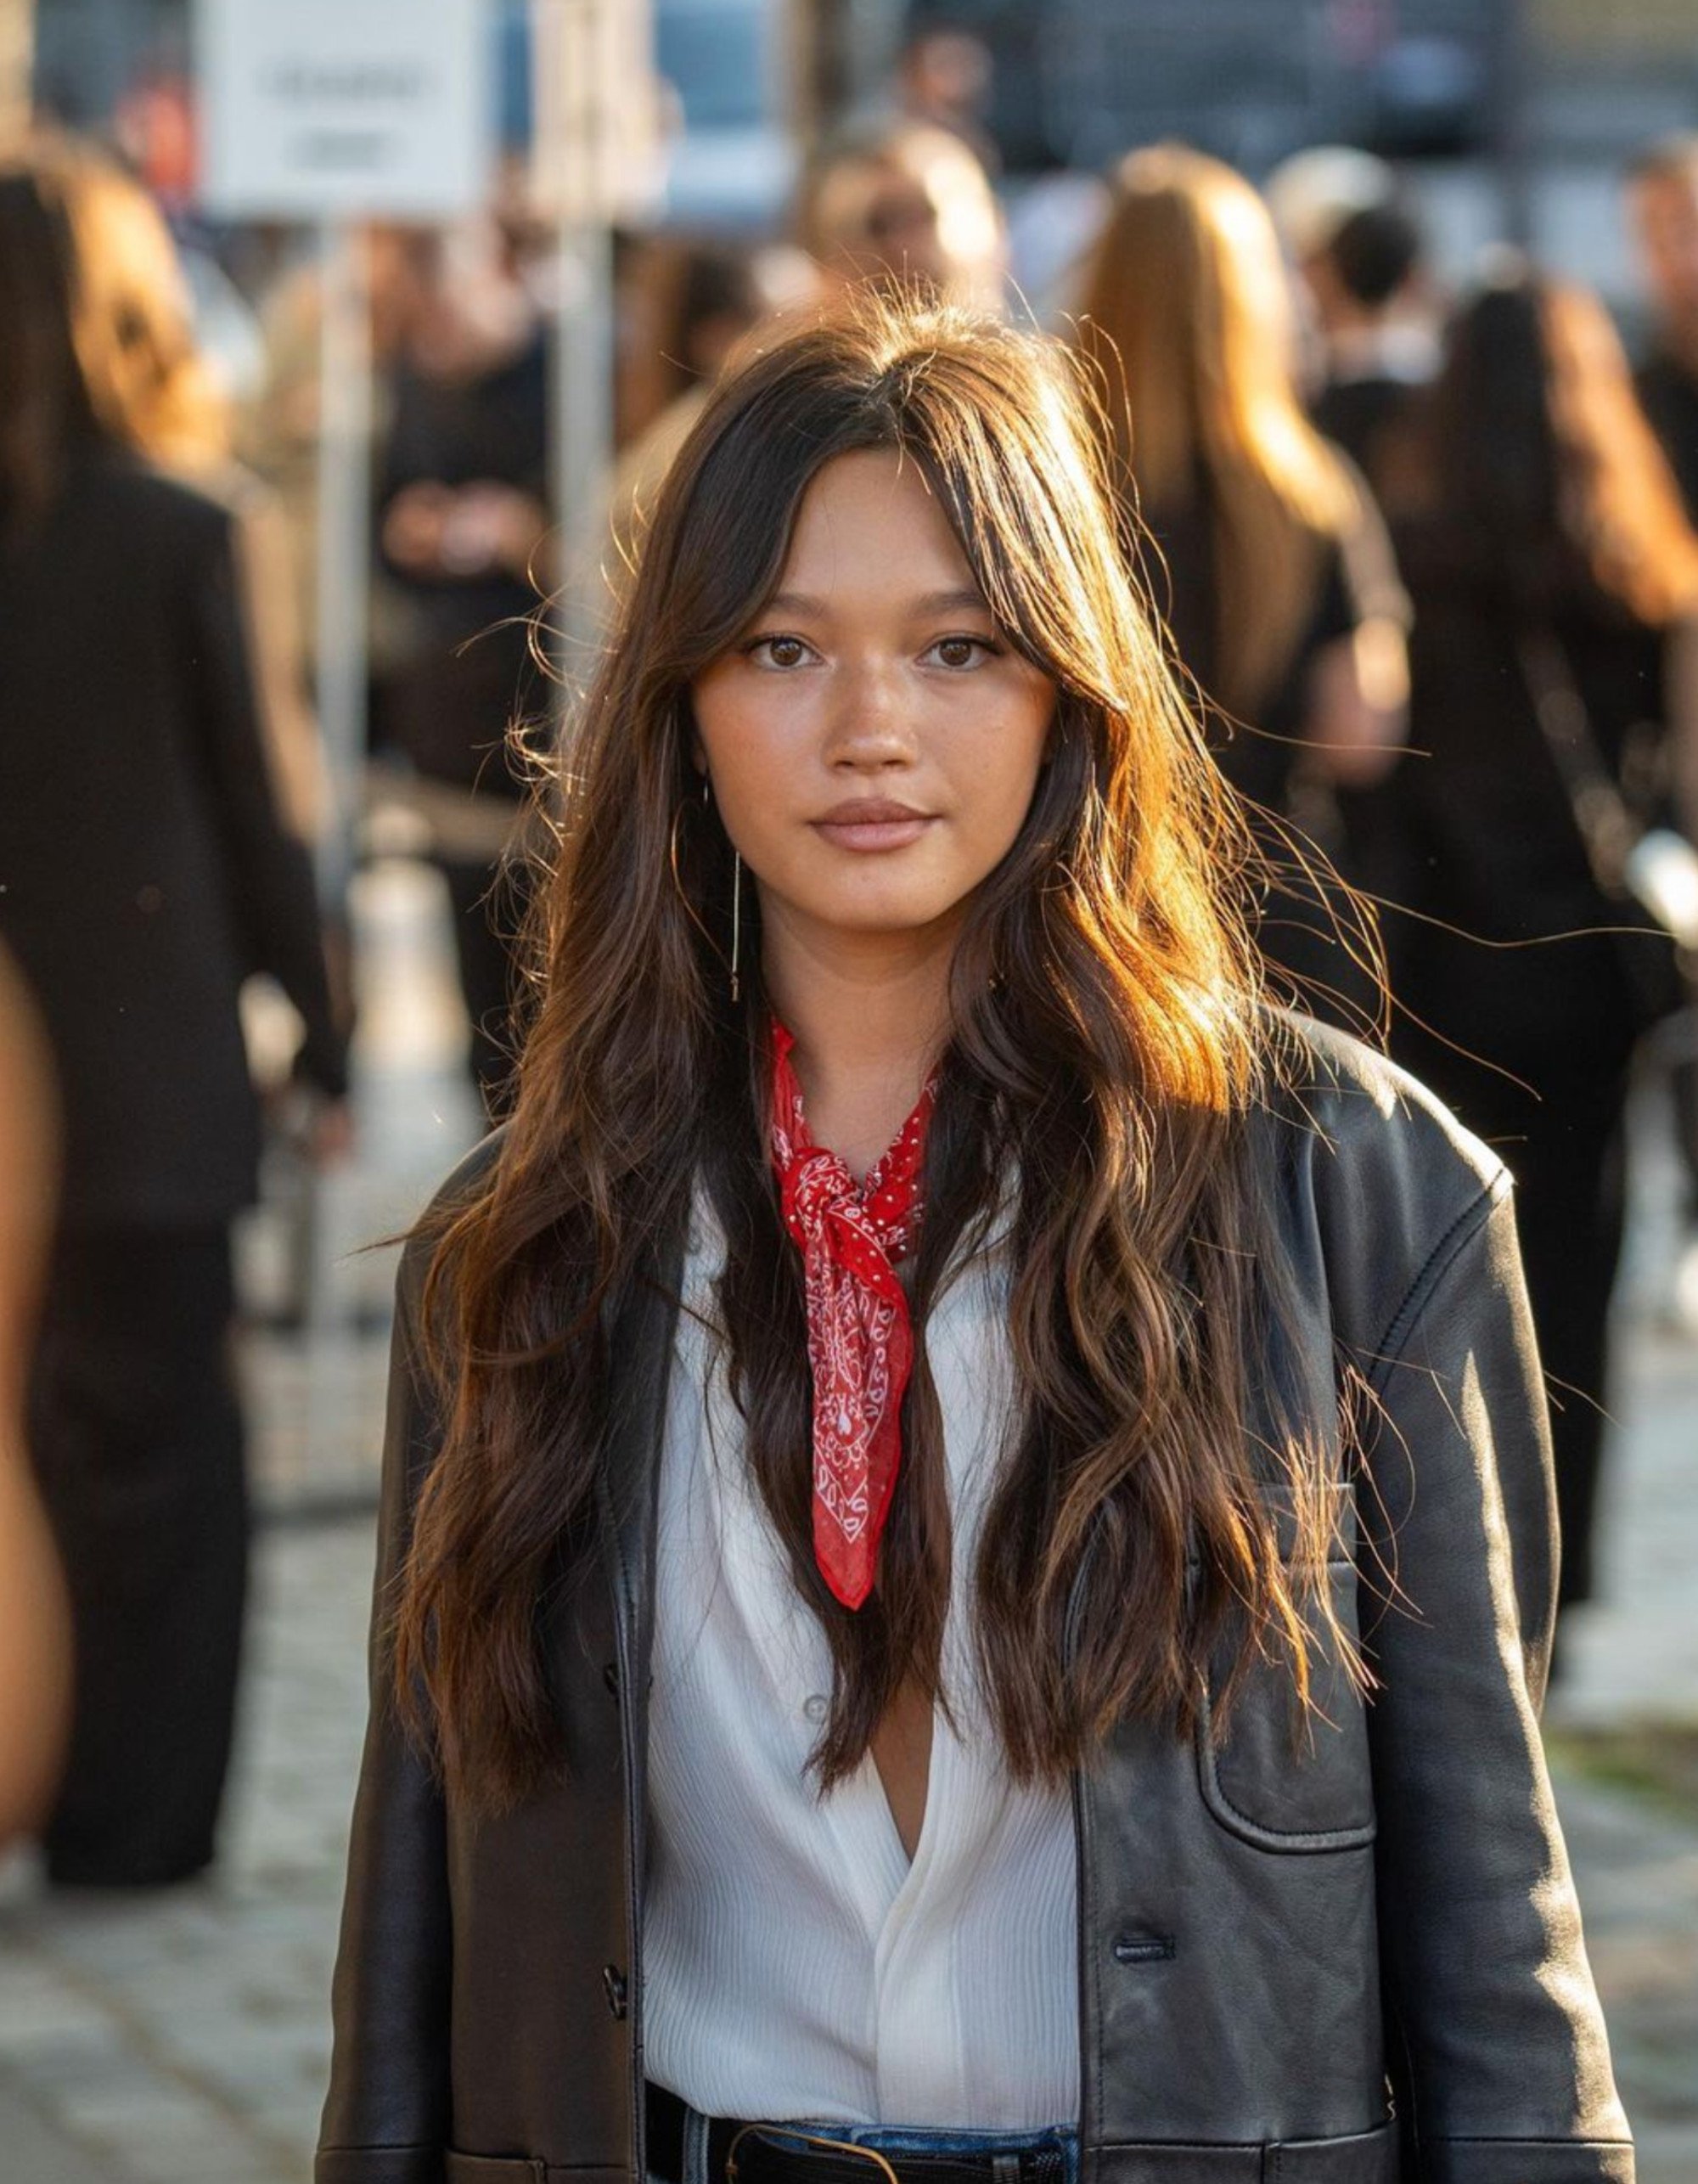 Is Lily Chee the next Gigi Hadid? The 'It' girl, rising fashion